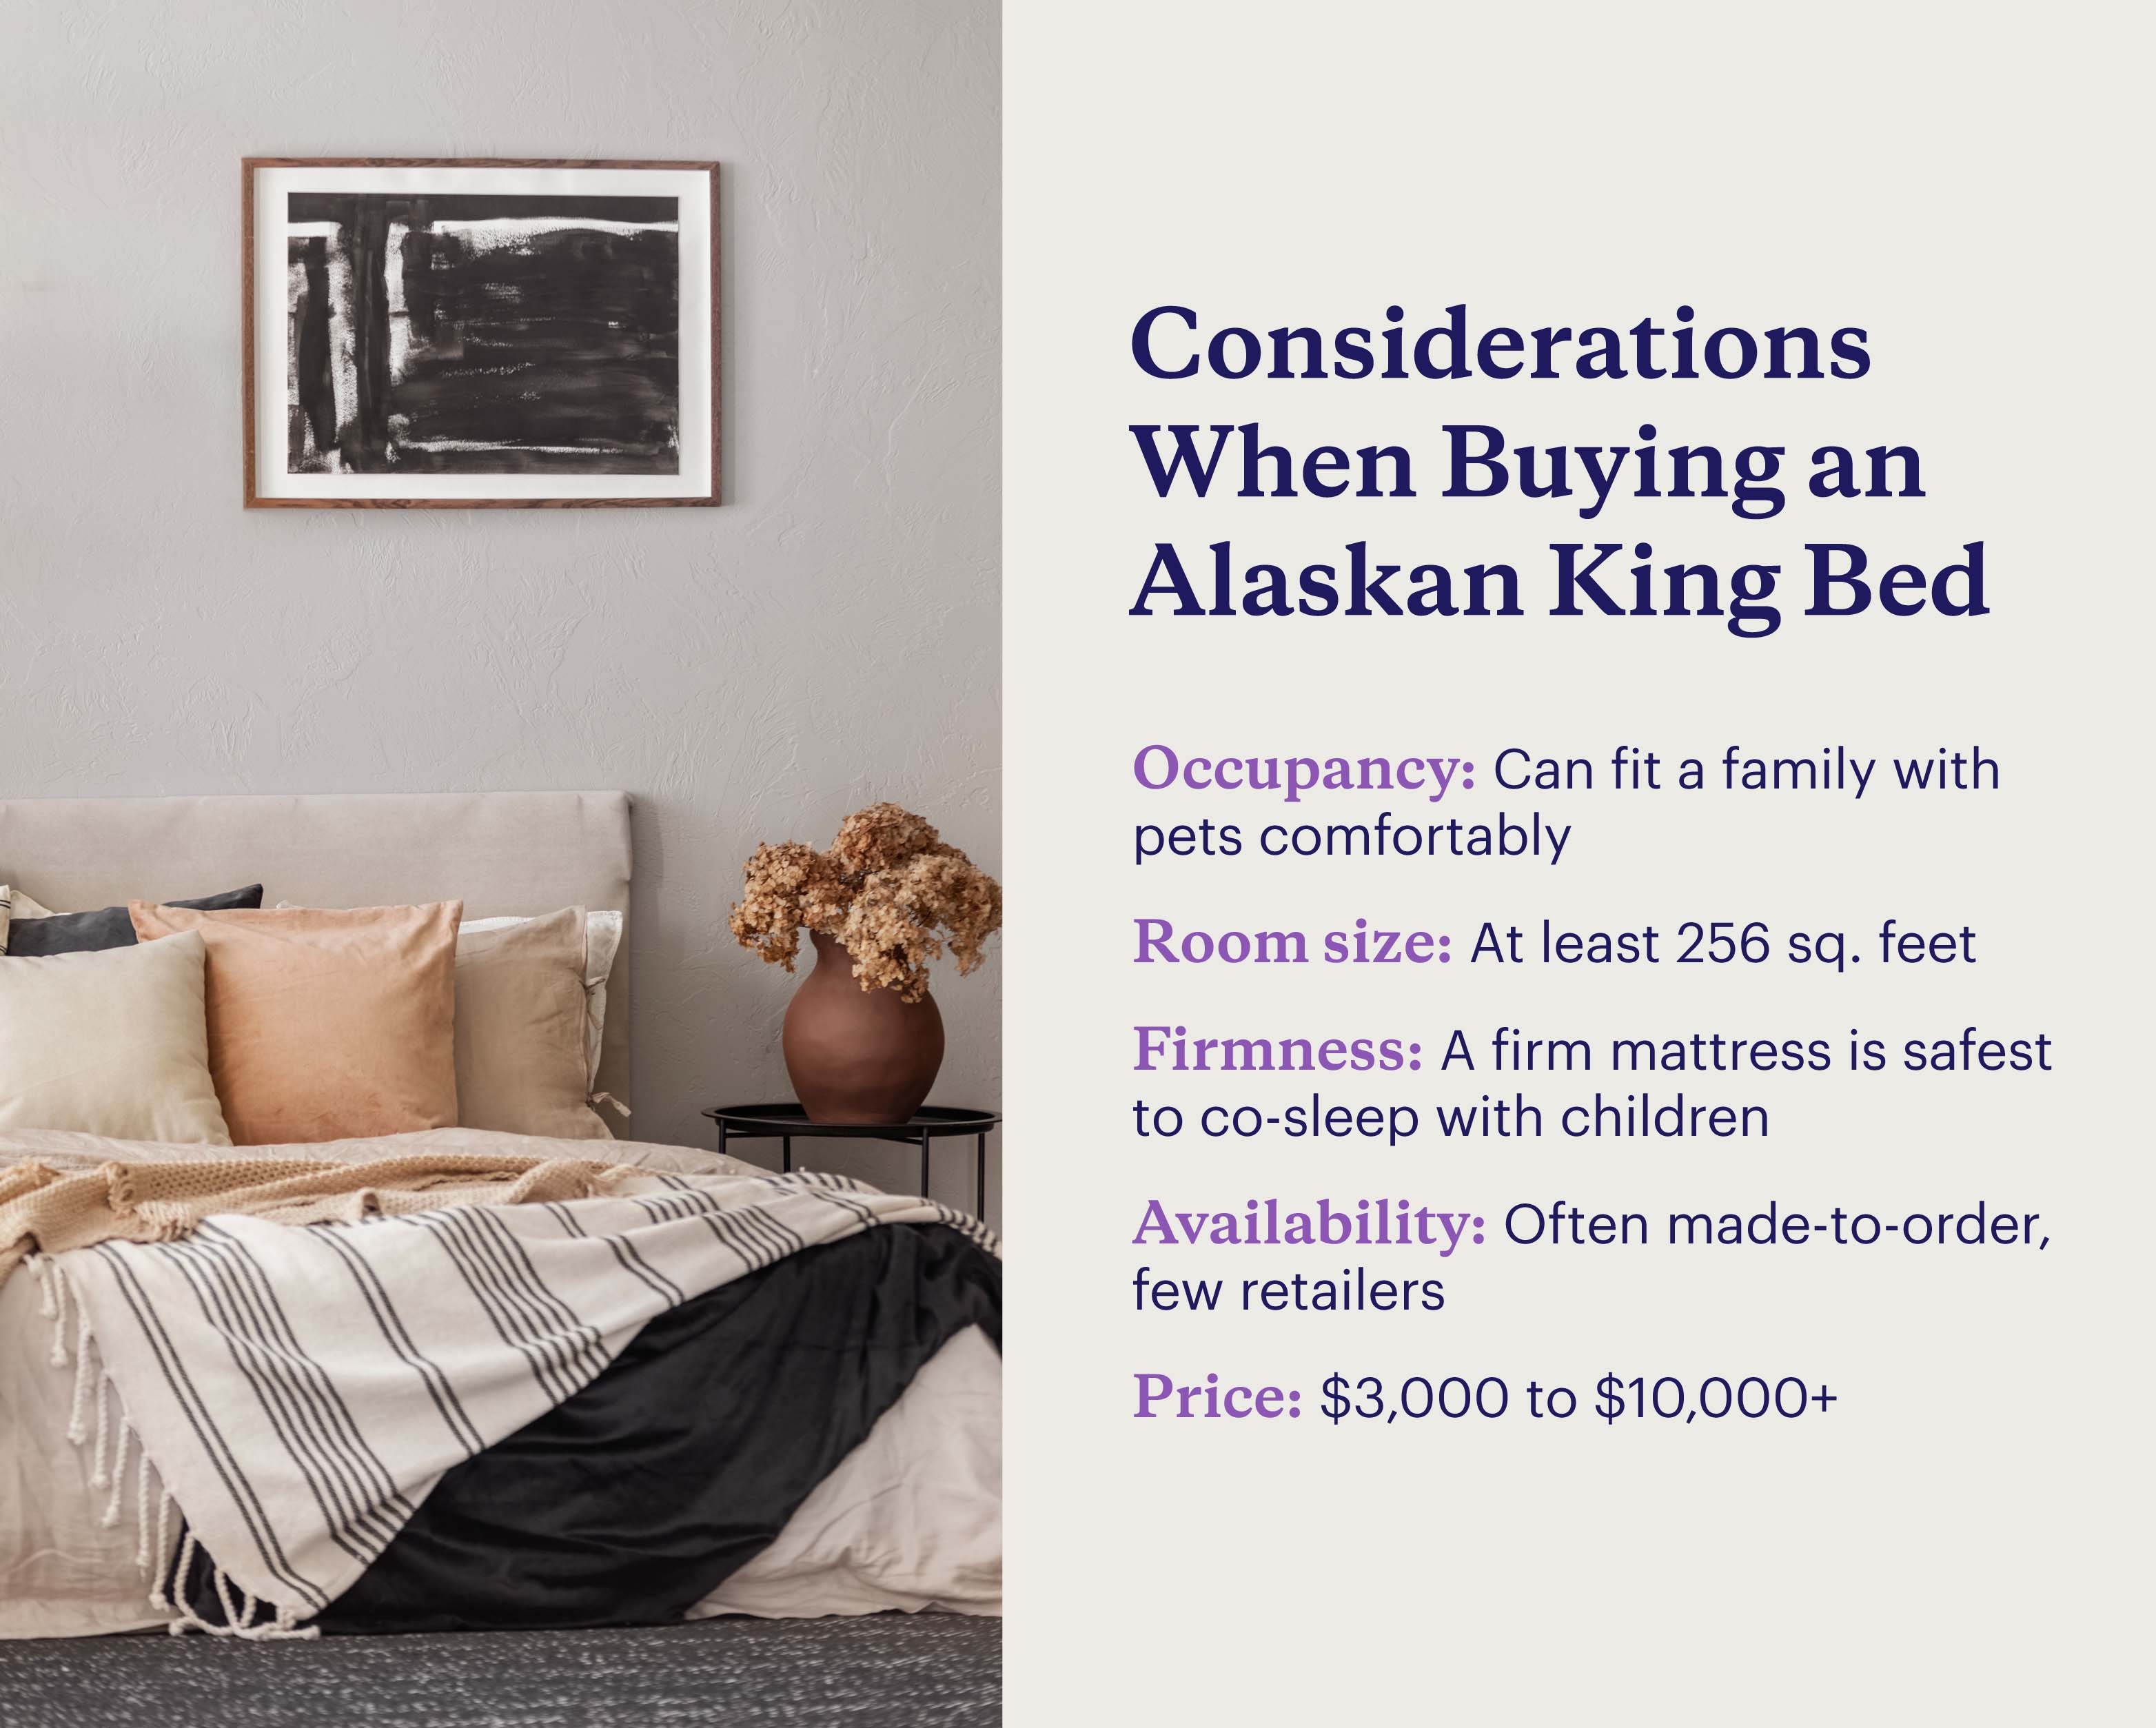  A graphic lists five considerations when buying an Alaskan king bed, including occupancy, room size, firmness, availability, and price.